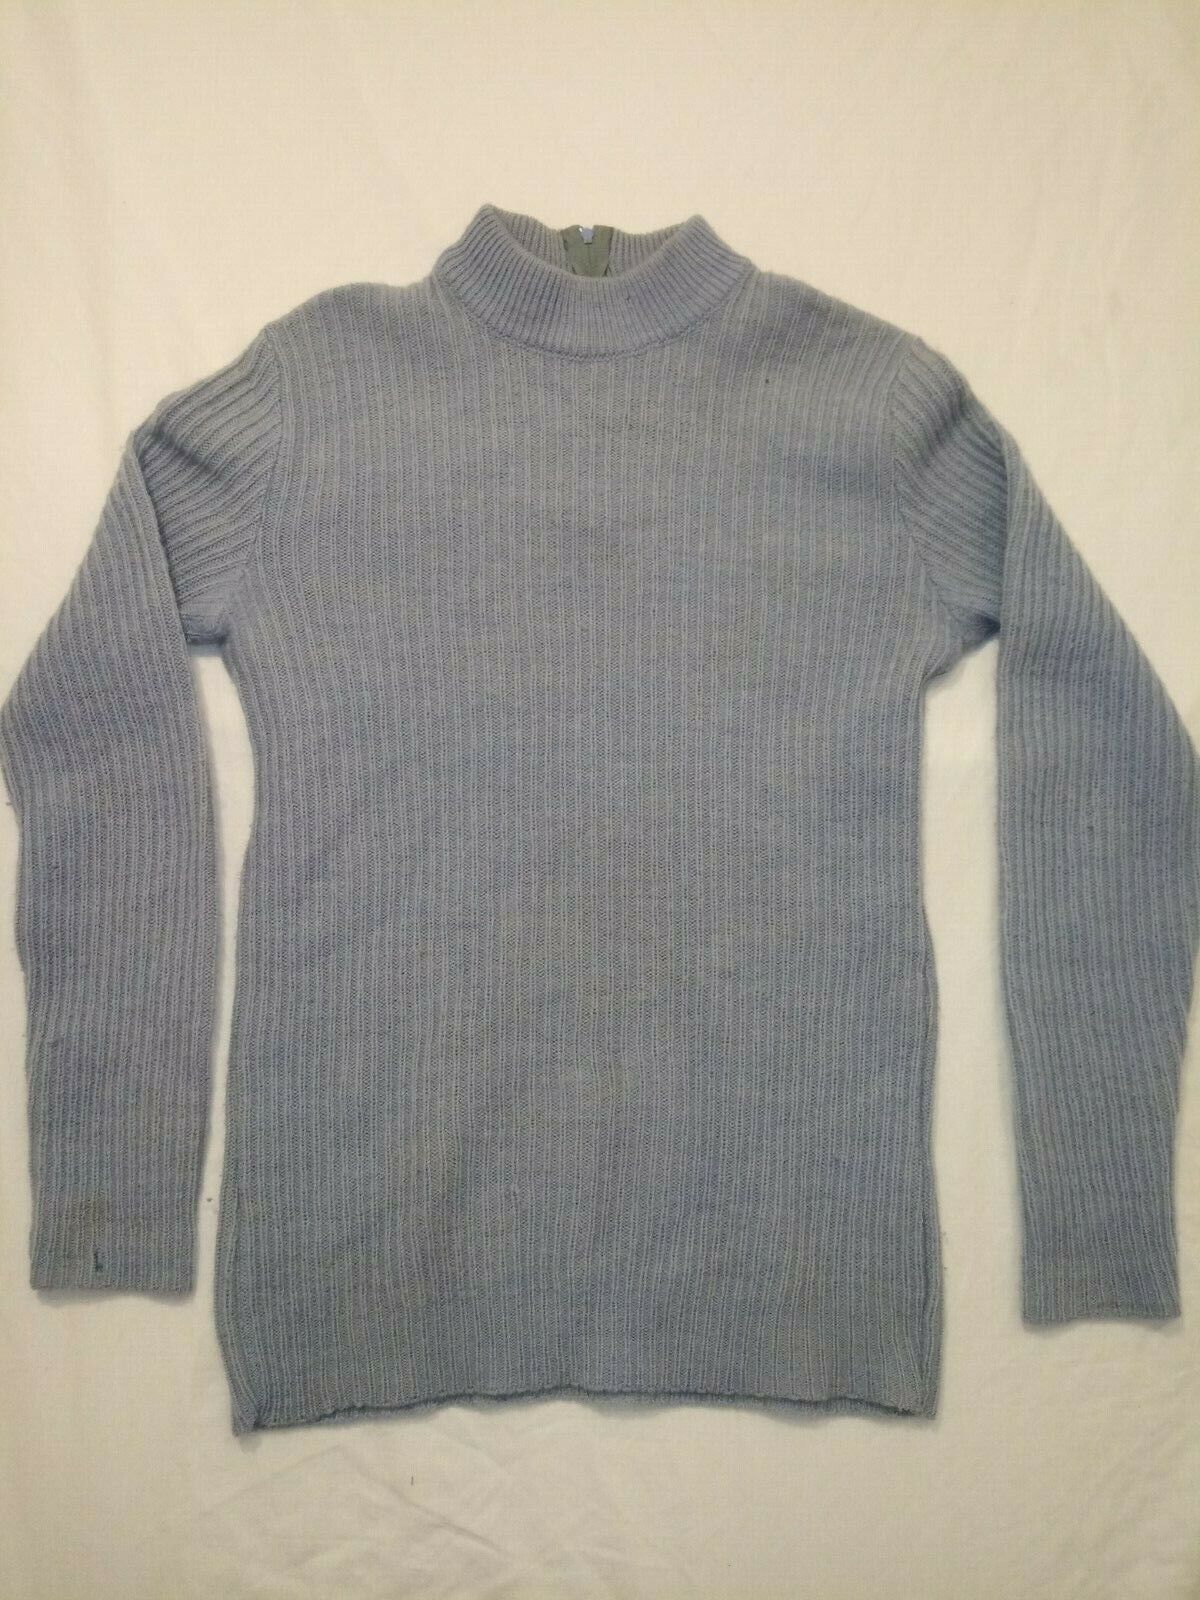 Primary image for Womens BOBBIE BROOKS PALE Blue 100% VIRGIN WOOL Sweater WITH 1/4 ZIP NECK SMALL